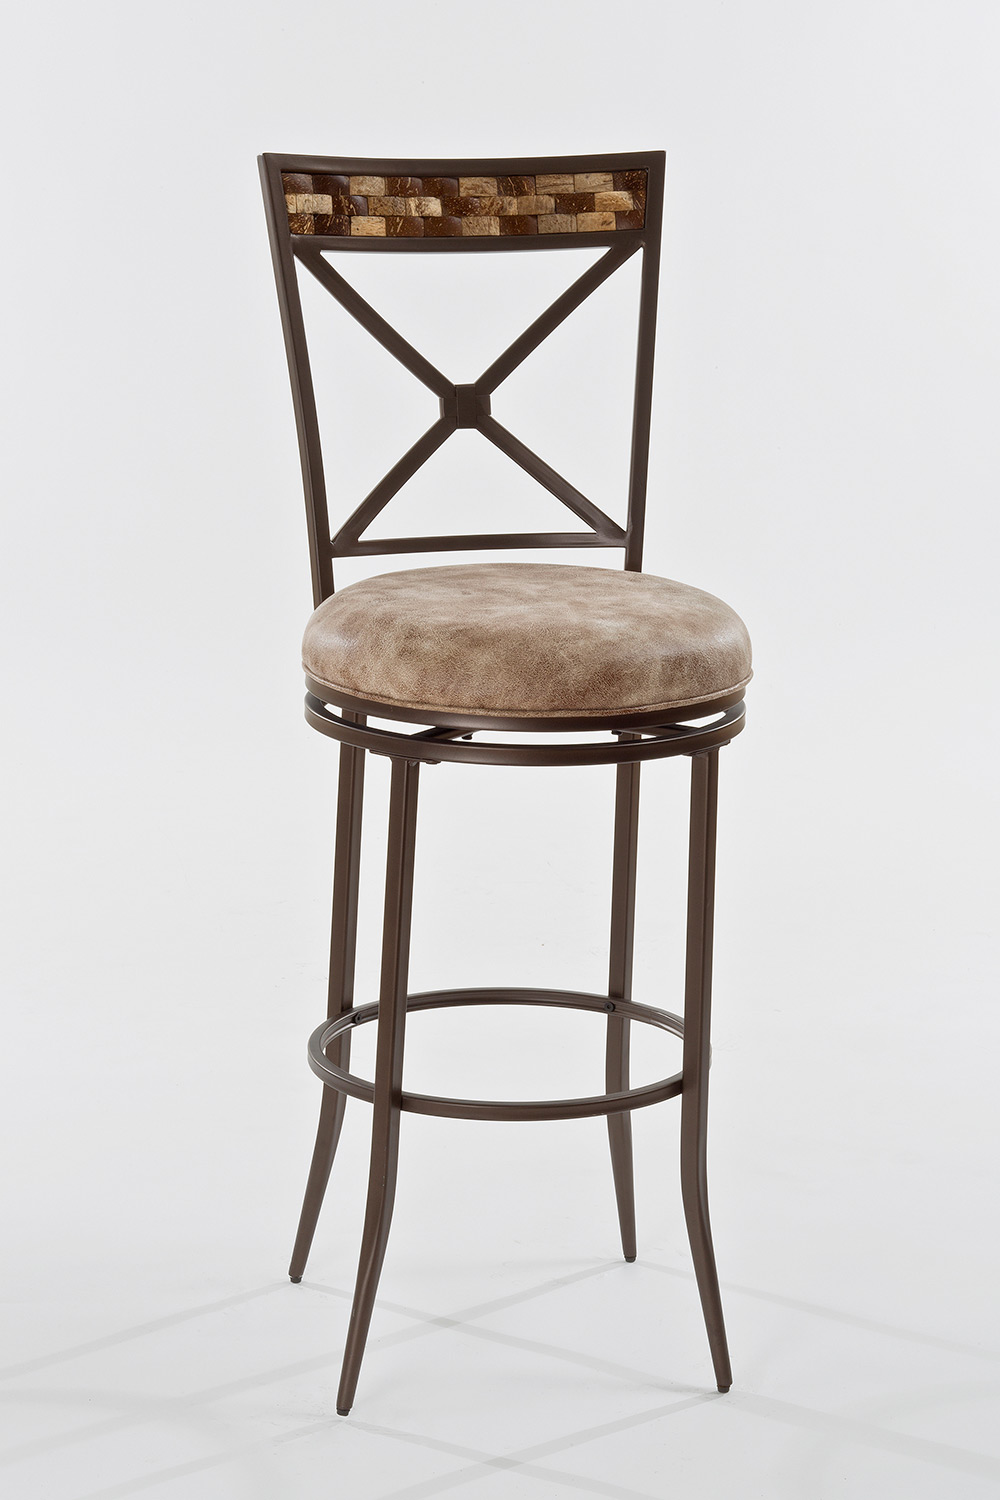 Hillsdale Compton Swivel Counter Stool - Brown - Weathered Beige Leatherette